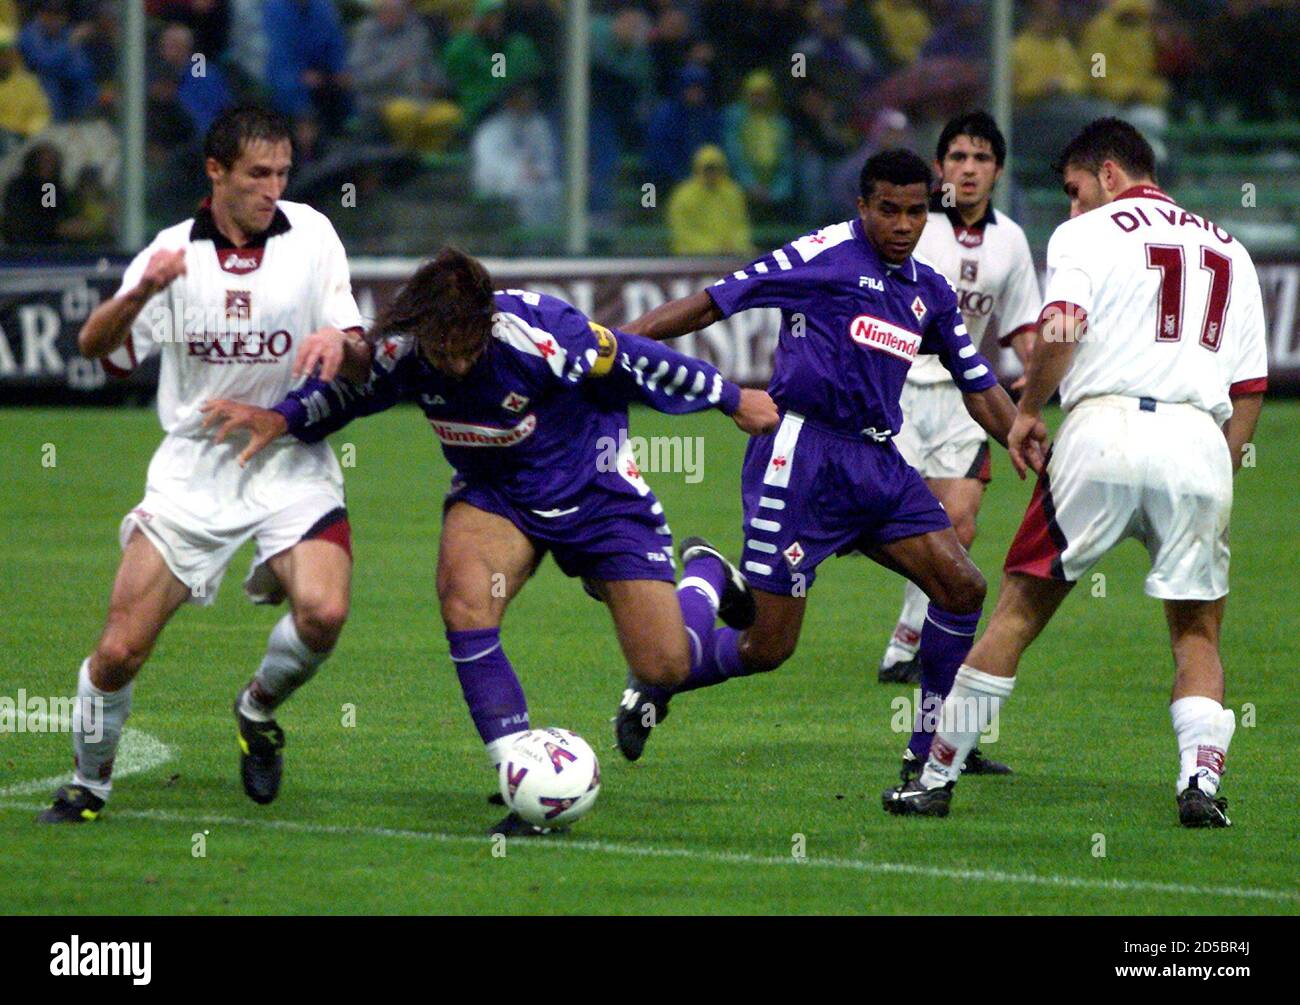 Fiorentina's Argentine Gabriel Batistuta (2nd L) scores a goal while  Salernitana's Alessandro Del Grosso (L) tries to stop him as Marco Di Vaio  (R) and Luis Oliveira looks on during their Serie